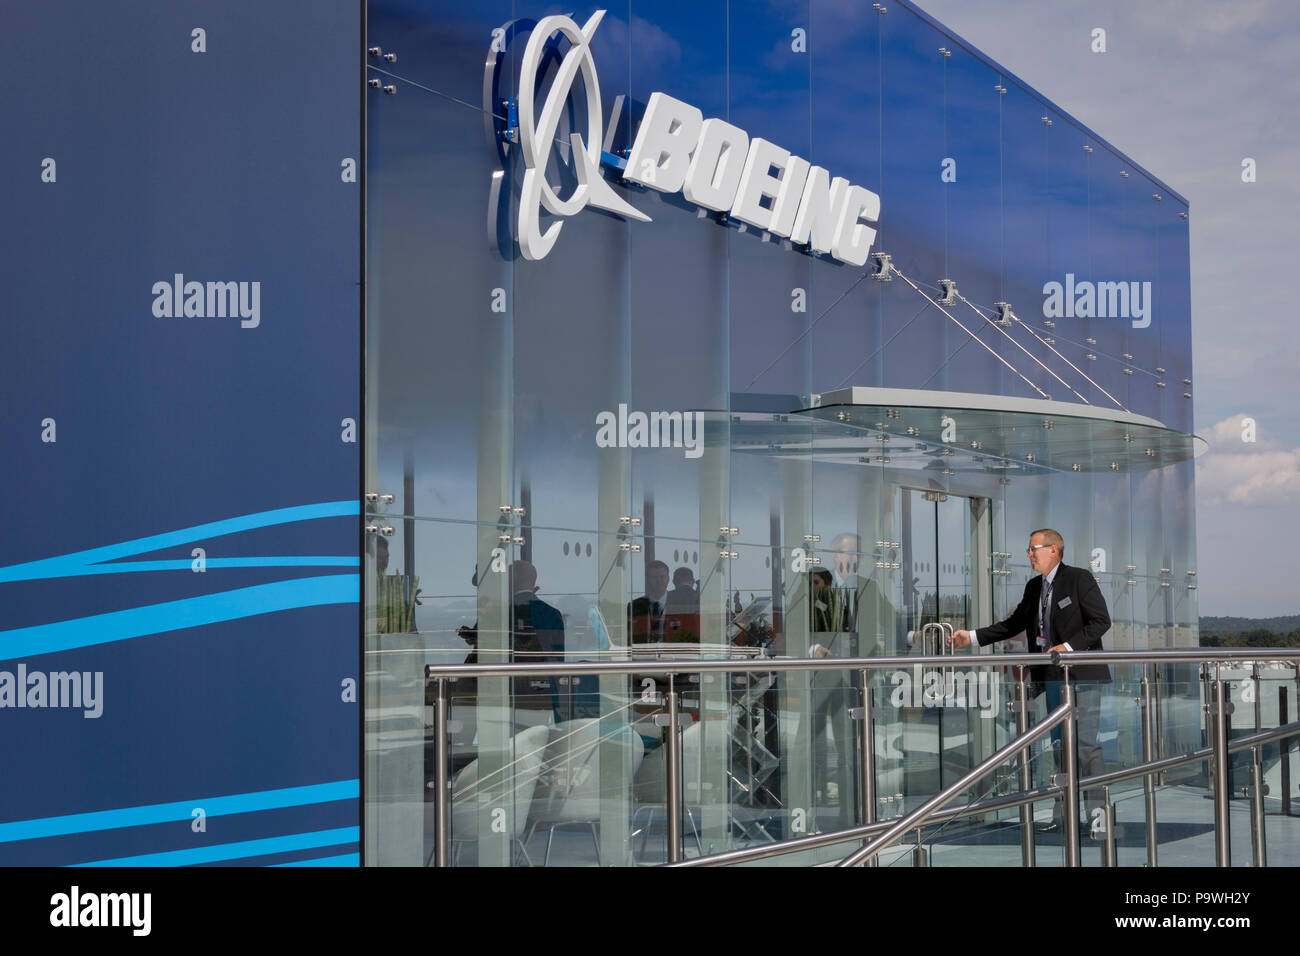 The Boeing hospitality chalet at the Farnborough Airshow, on 16th July 2018, in Farnborough, England. Stock Photo